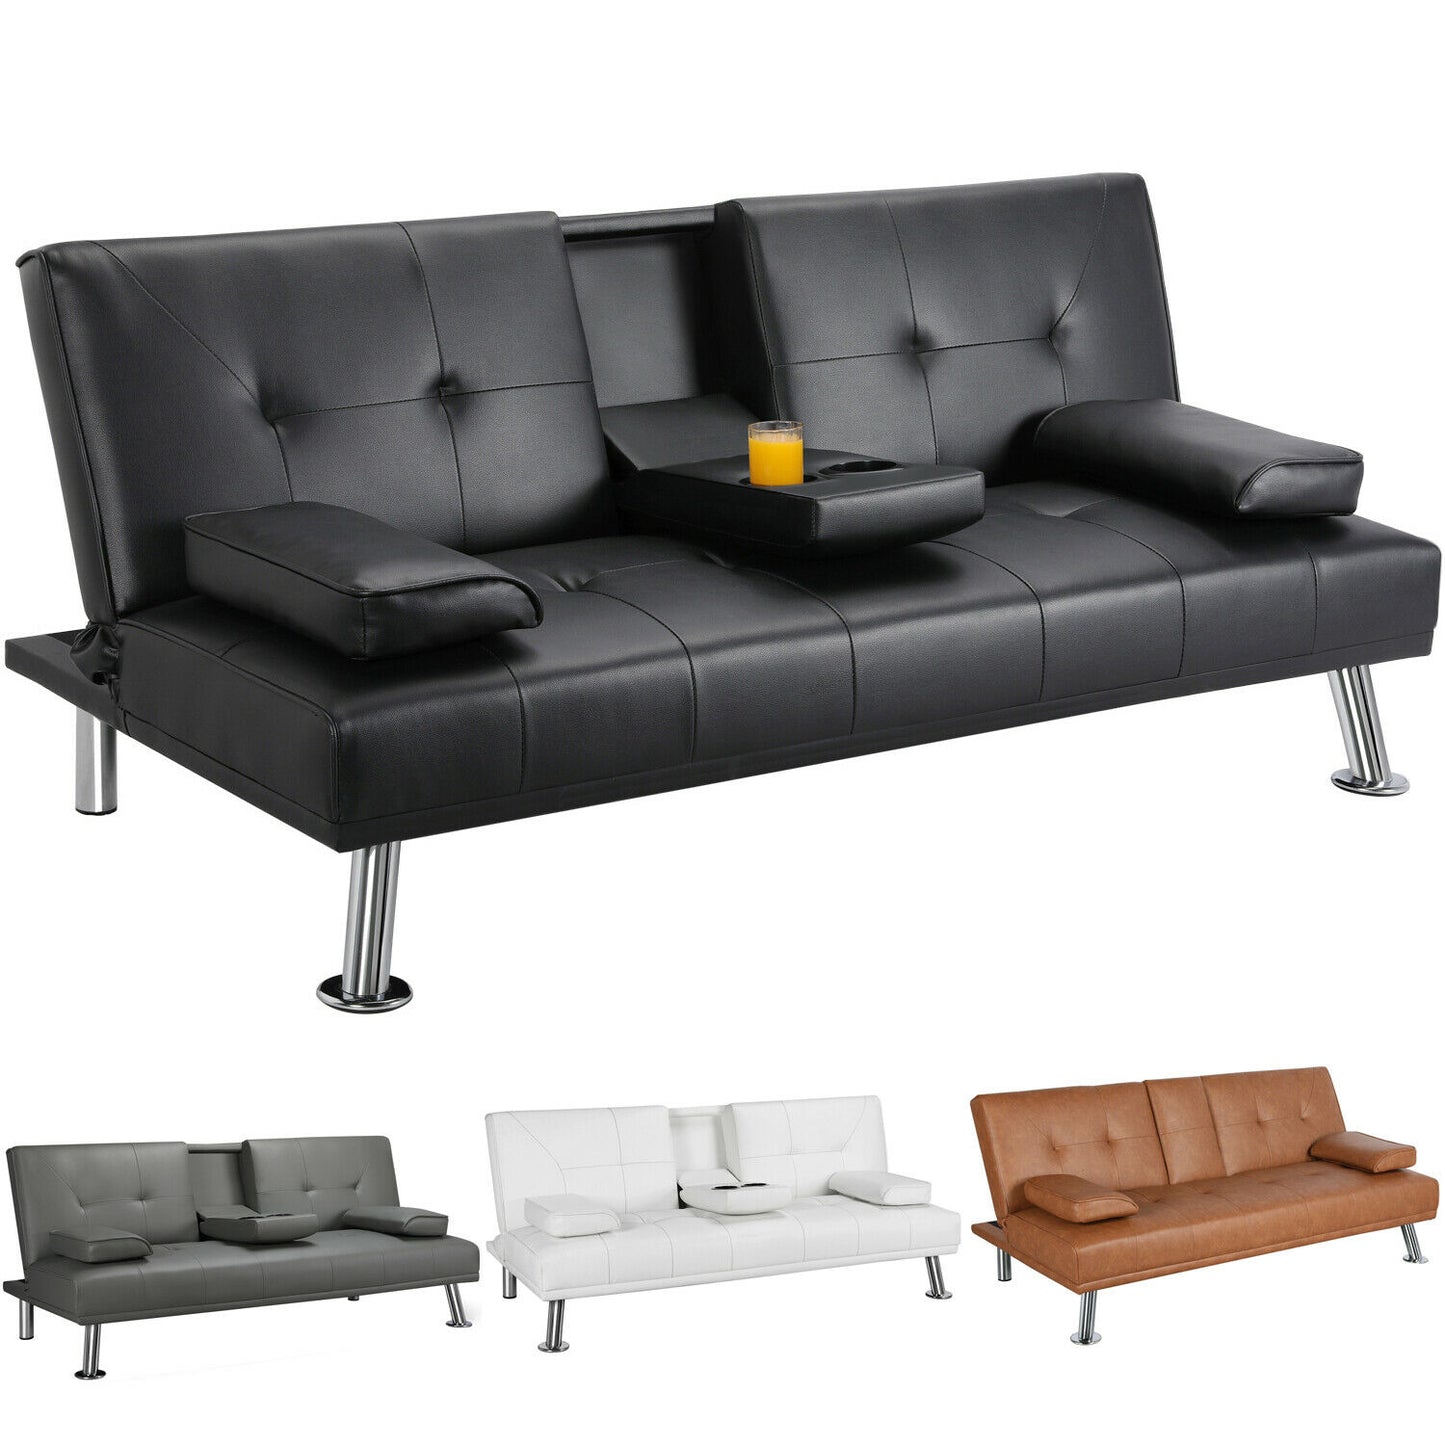 Modern Faux Leather Futon Sofa Bed - Fold Up & Down Recliner Couch with Cup Holder - Convertible Futon Sofa w/ Removable Armrests